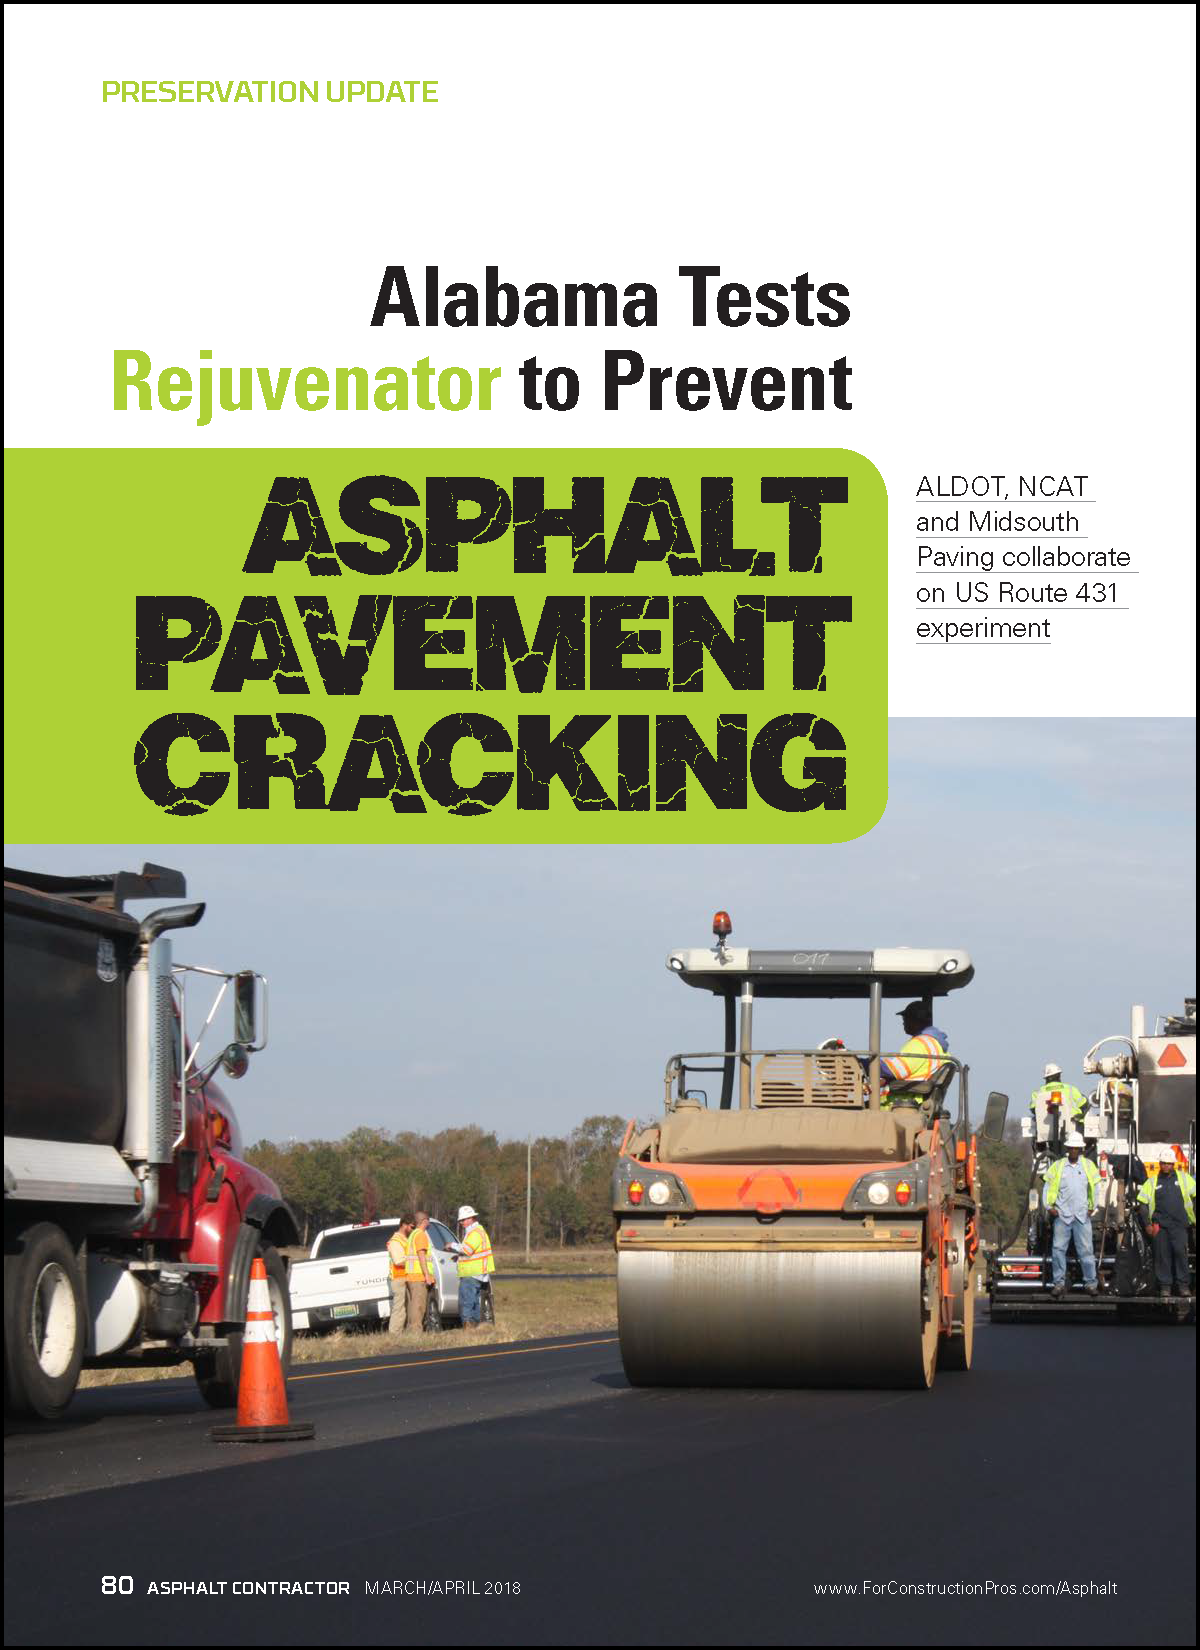 March/April 2018 edition of Asphalt Contractor magazine features ALDOT teaming up with NCAT and Midsouth Paving for December 2017 field research production & paving utilizing Delta S asphalt rejuvenator